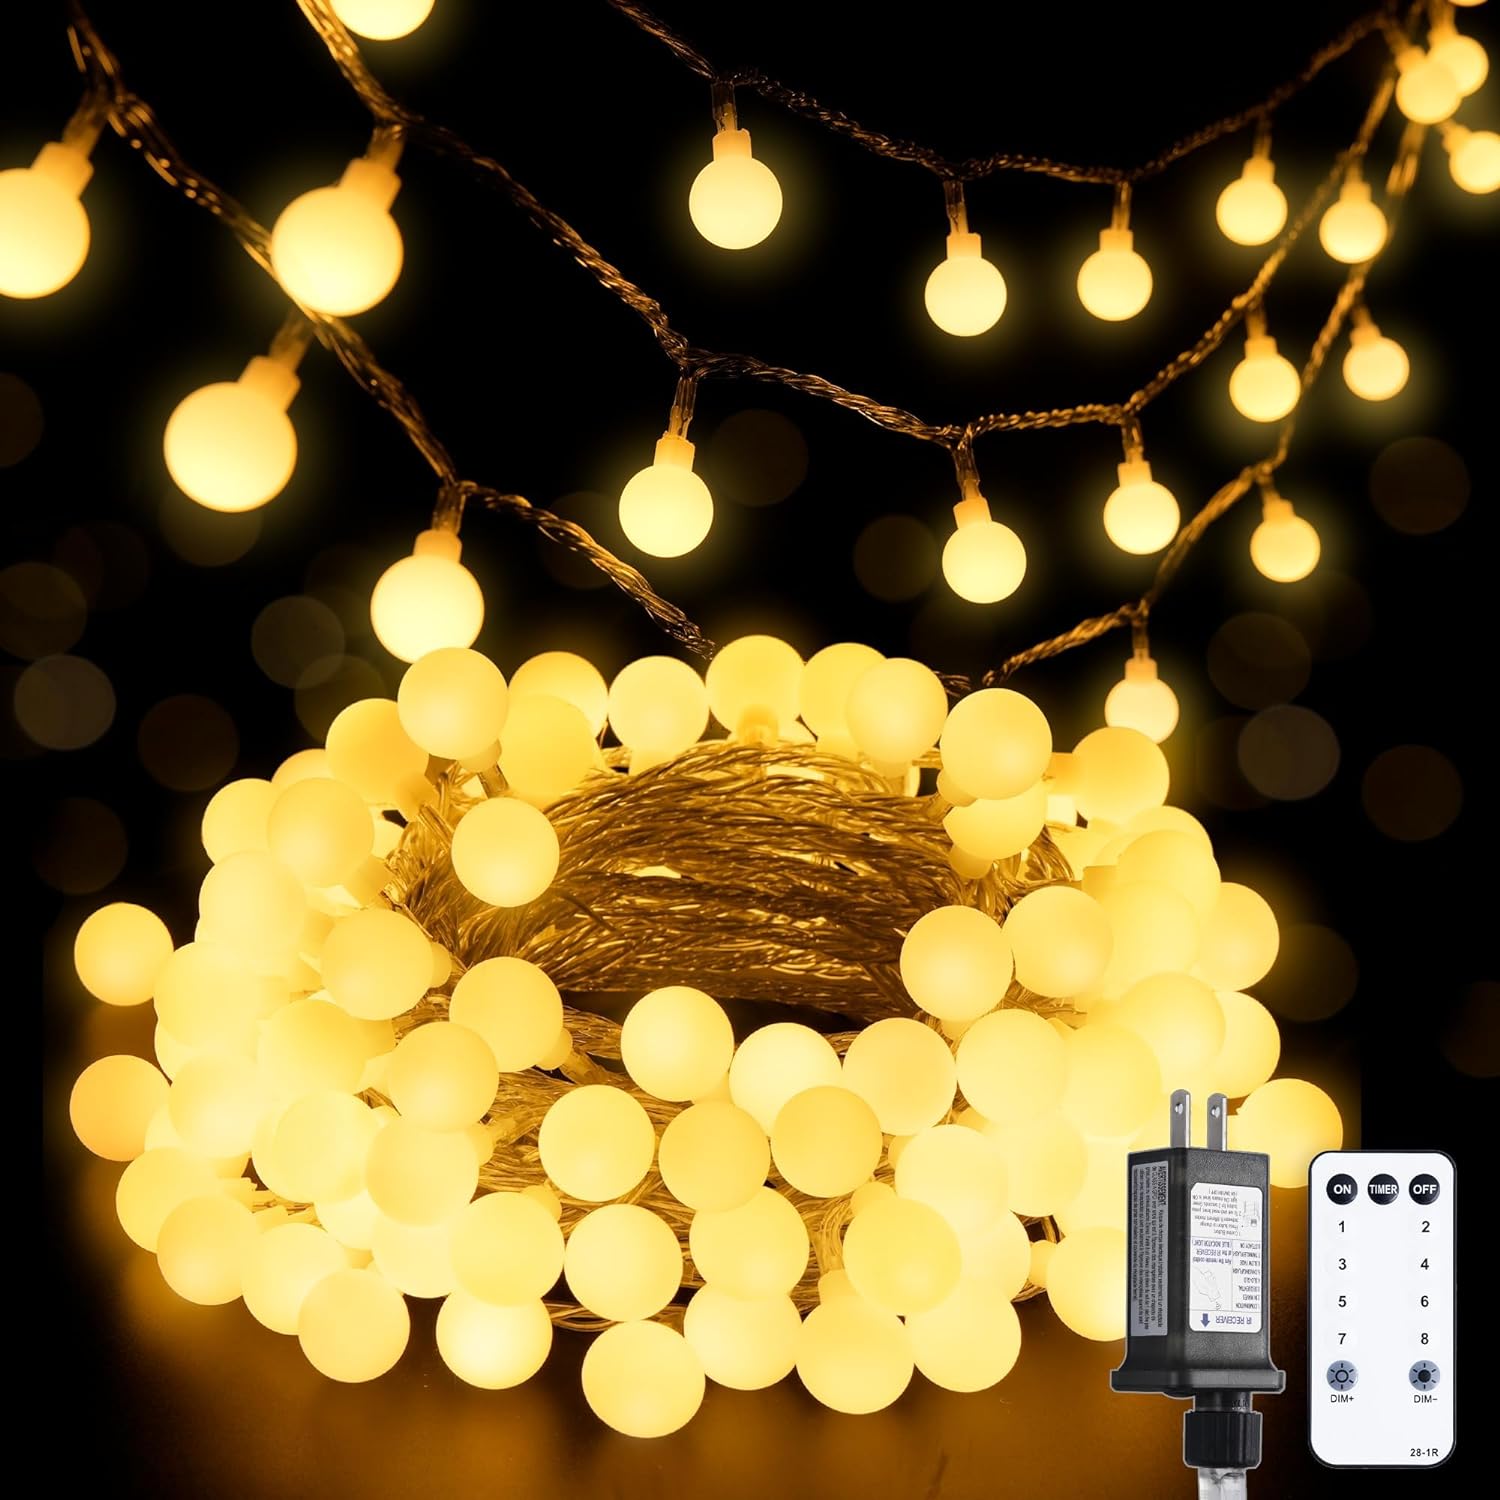 JMEXSUSS 100 LED Connectable Globe String Lights Indoor Bedroom, 33ft Warm White String Lights with Remote Plug in, 8Mode Christmas Lights Outdoor Waterproof for Classroom Patio Party Weeding Decor